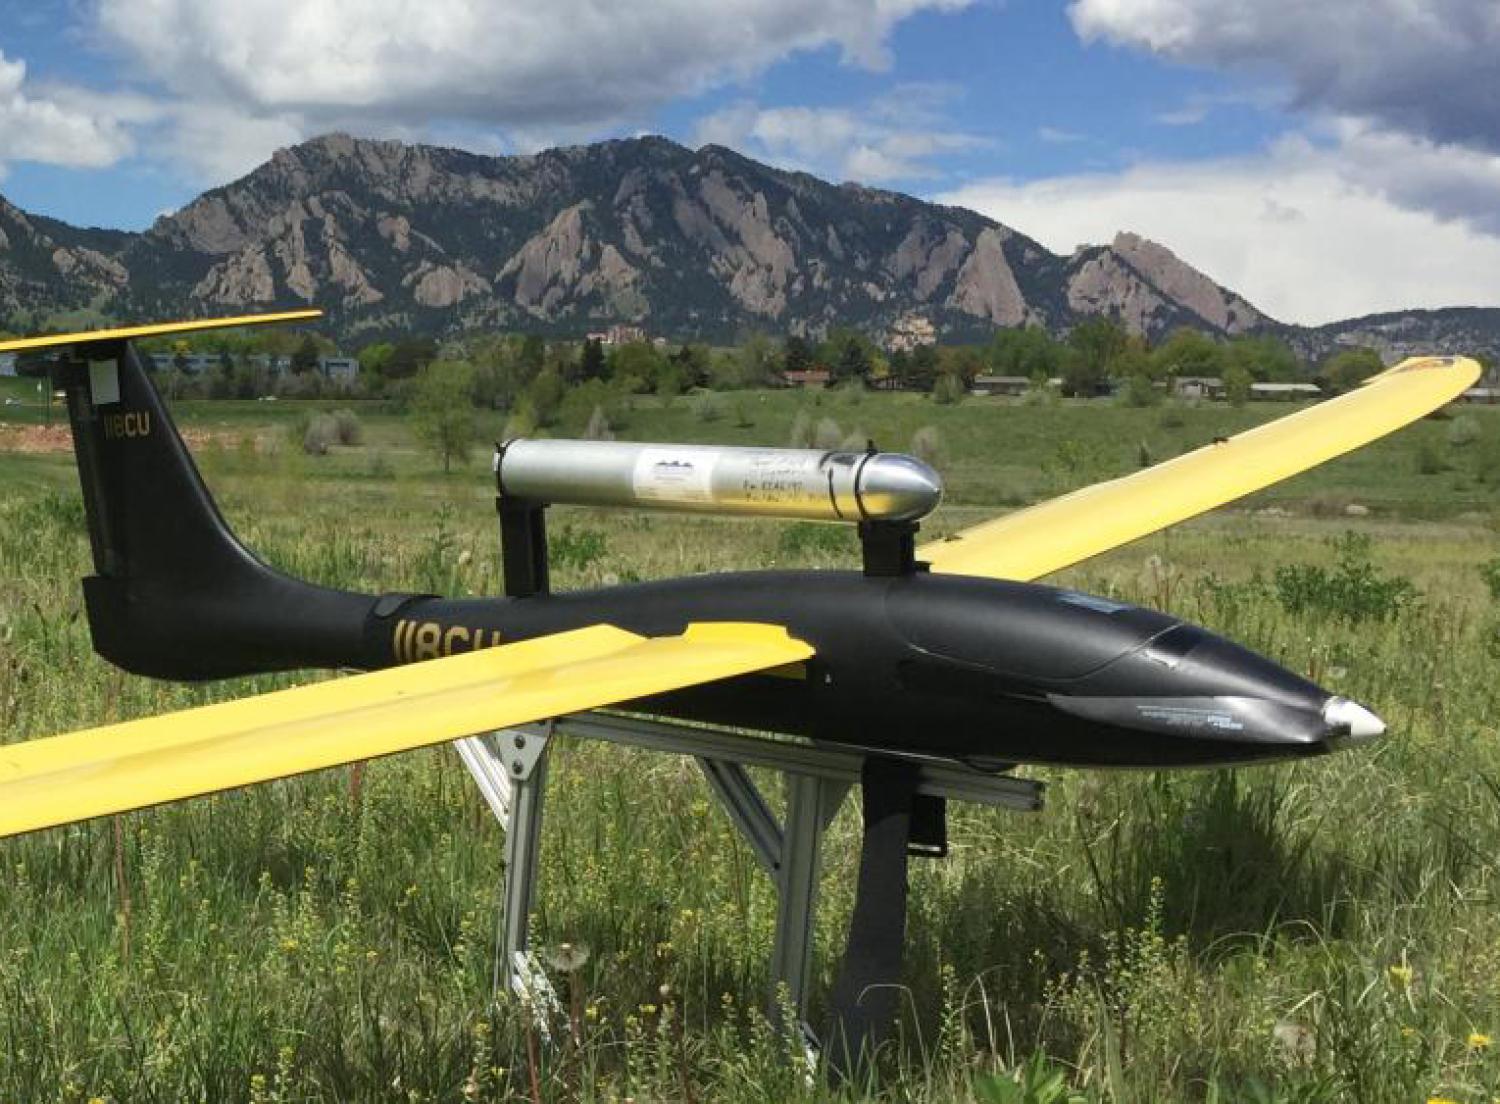 Unmanned flying vehicle parked in a field near Boulder